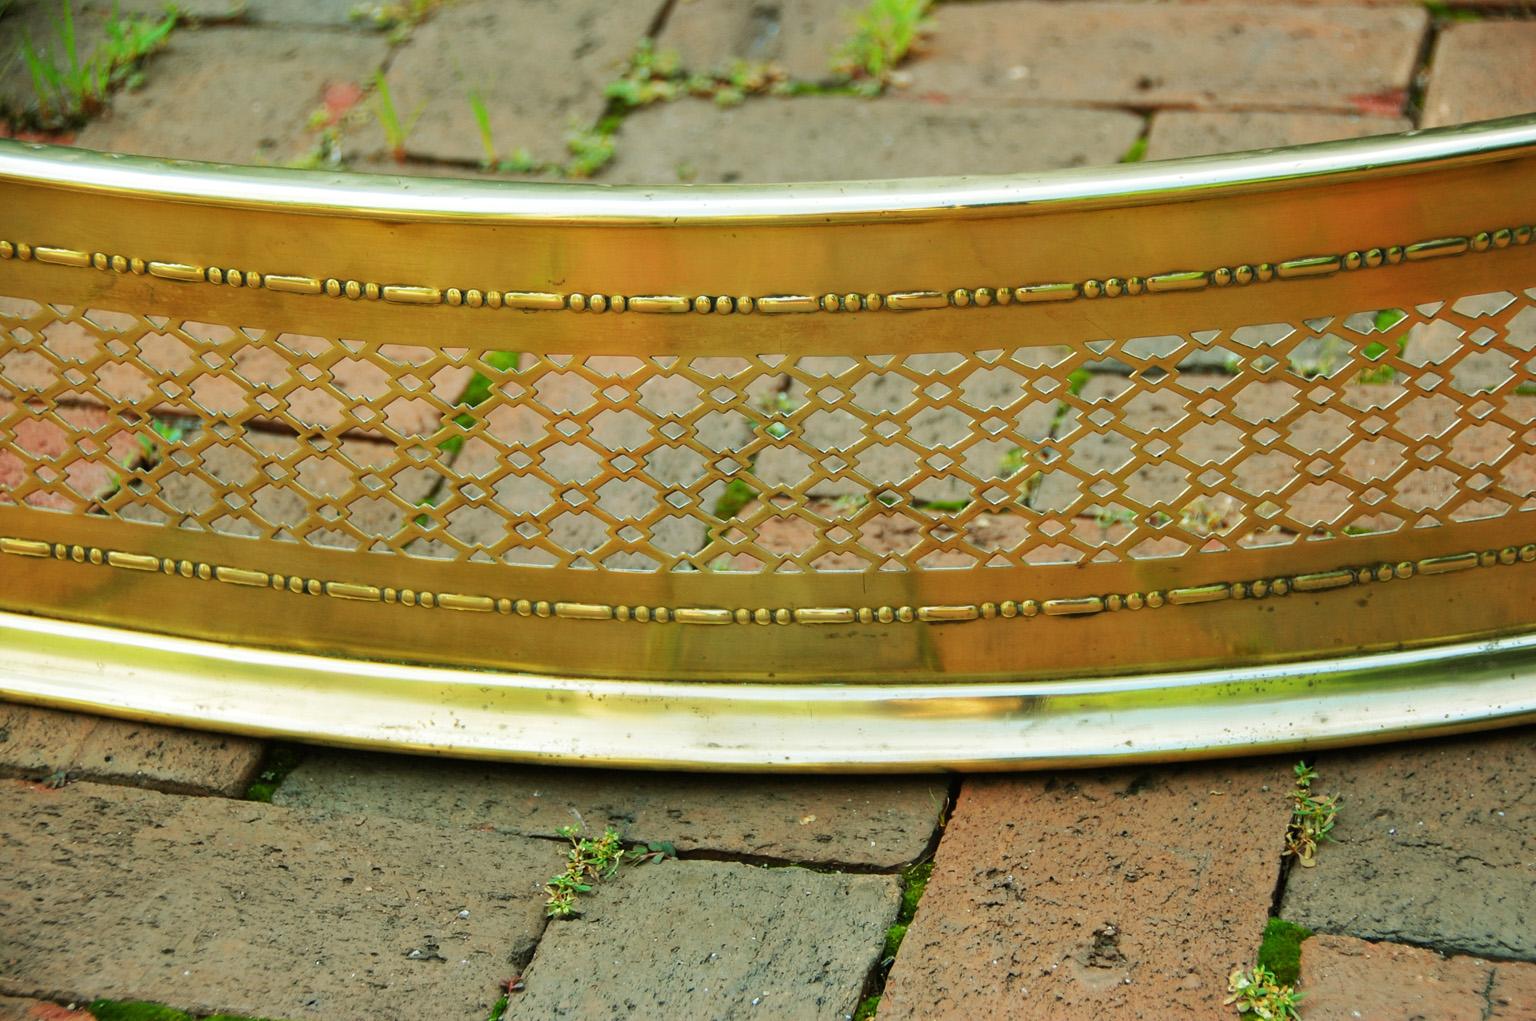 American late 19th century serpentine brass pierced fender with two brass balls on each return; 59 1/2 inches long. There are small bruises to the top rail of the fender.